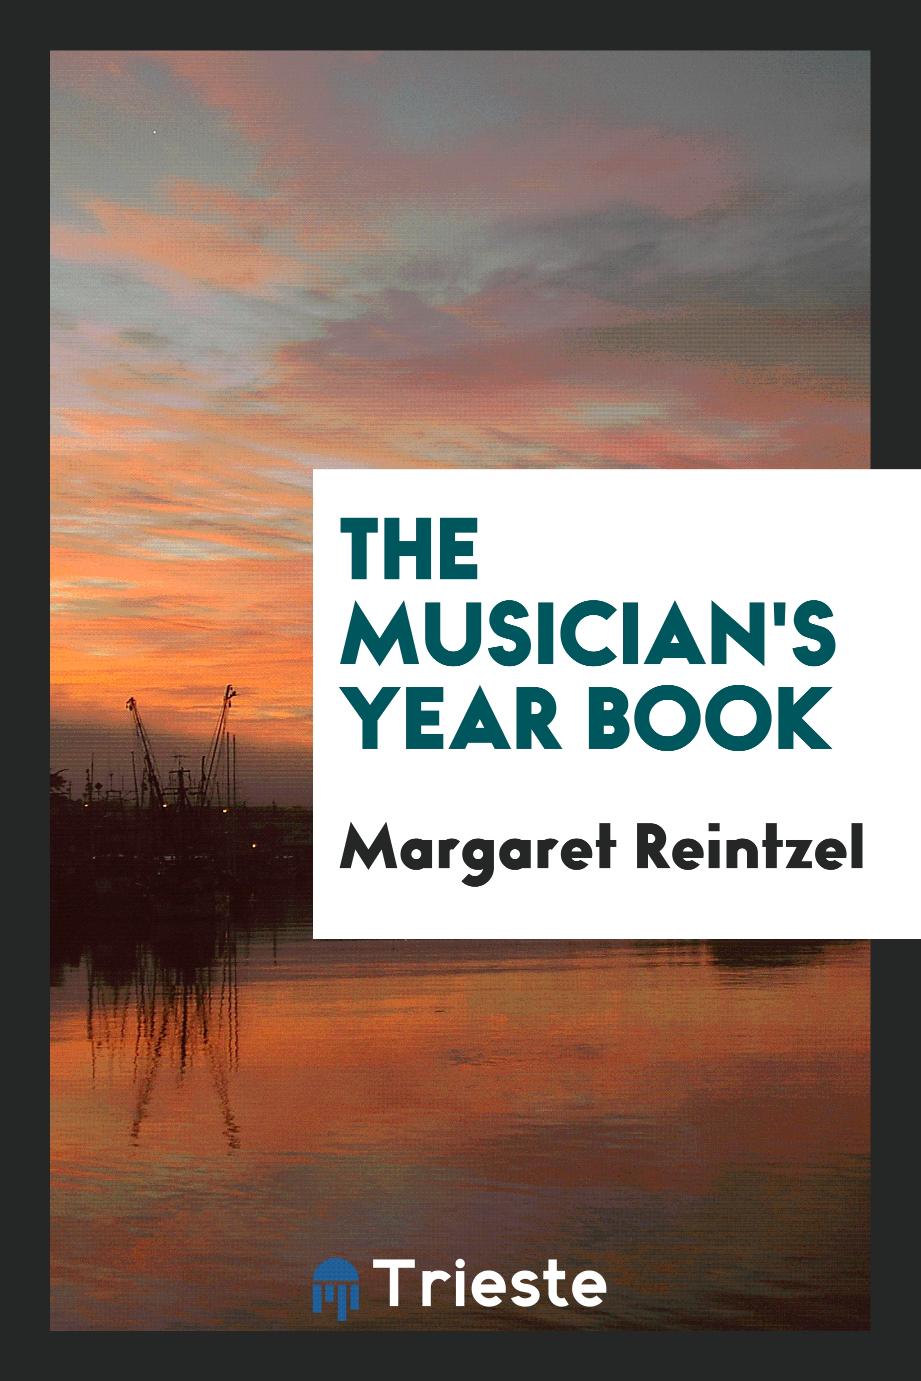 The Musician's Year Book